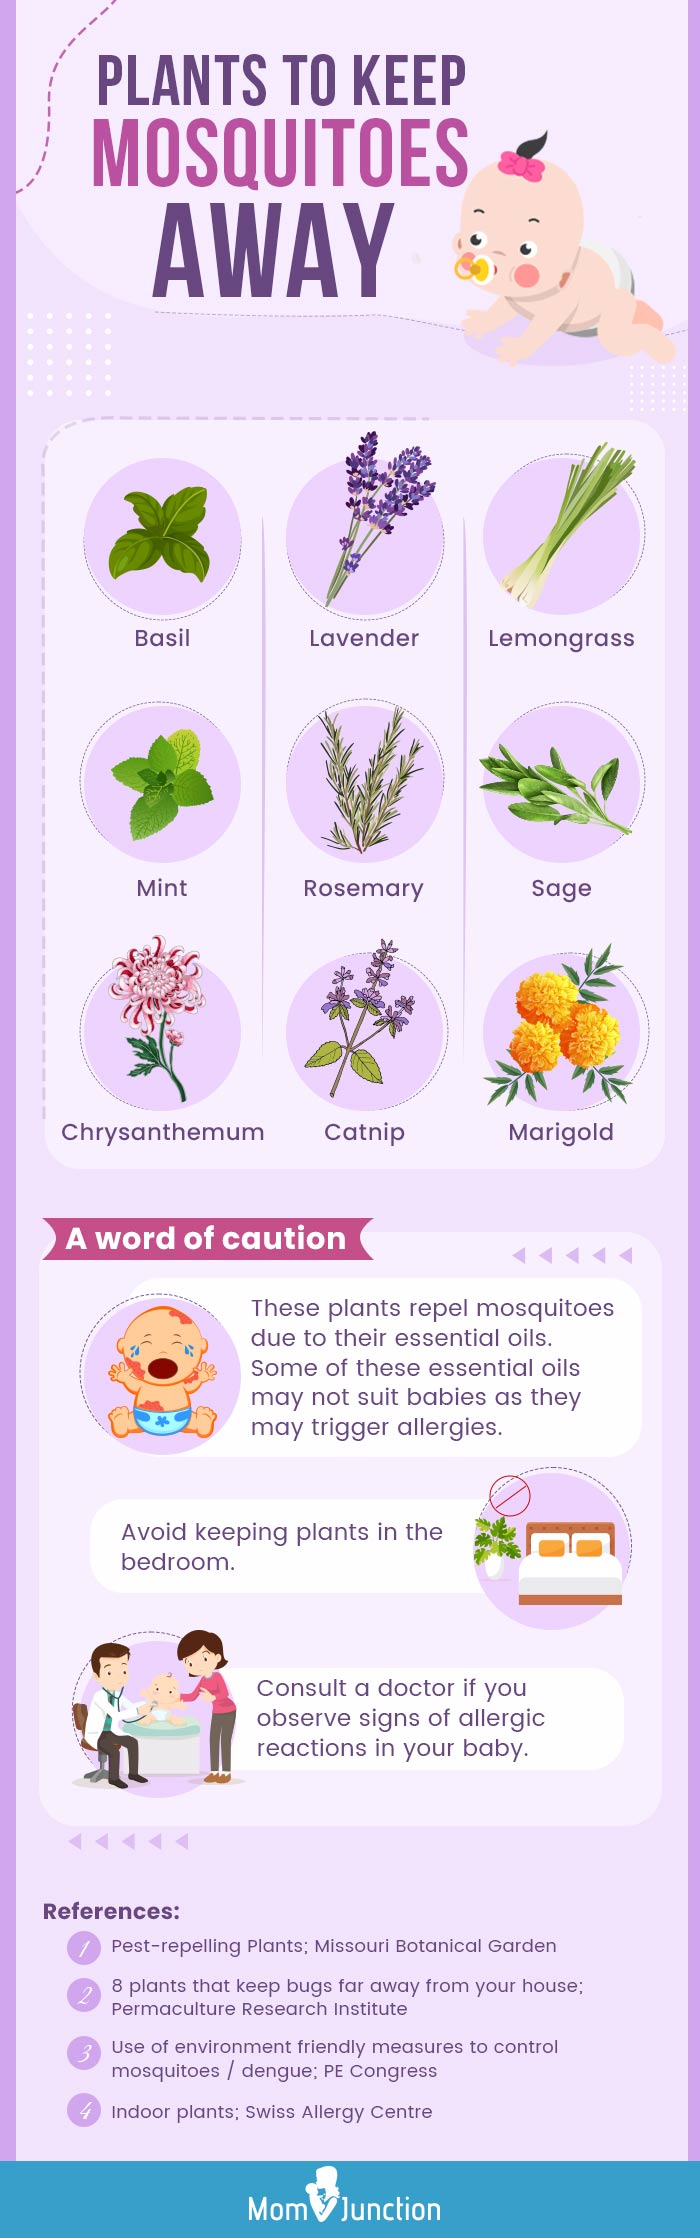 plants to keep mosquitoes away (infographic)